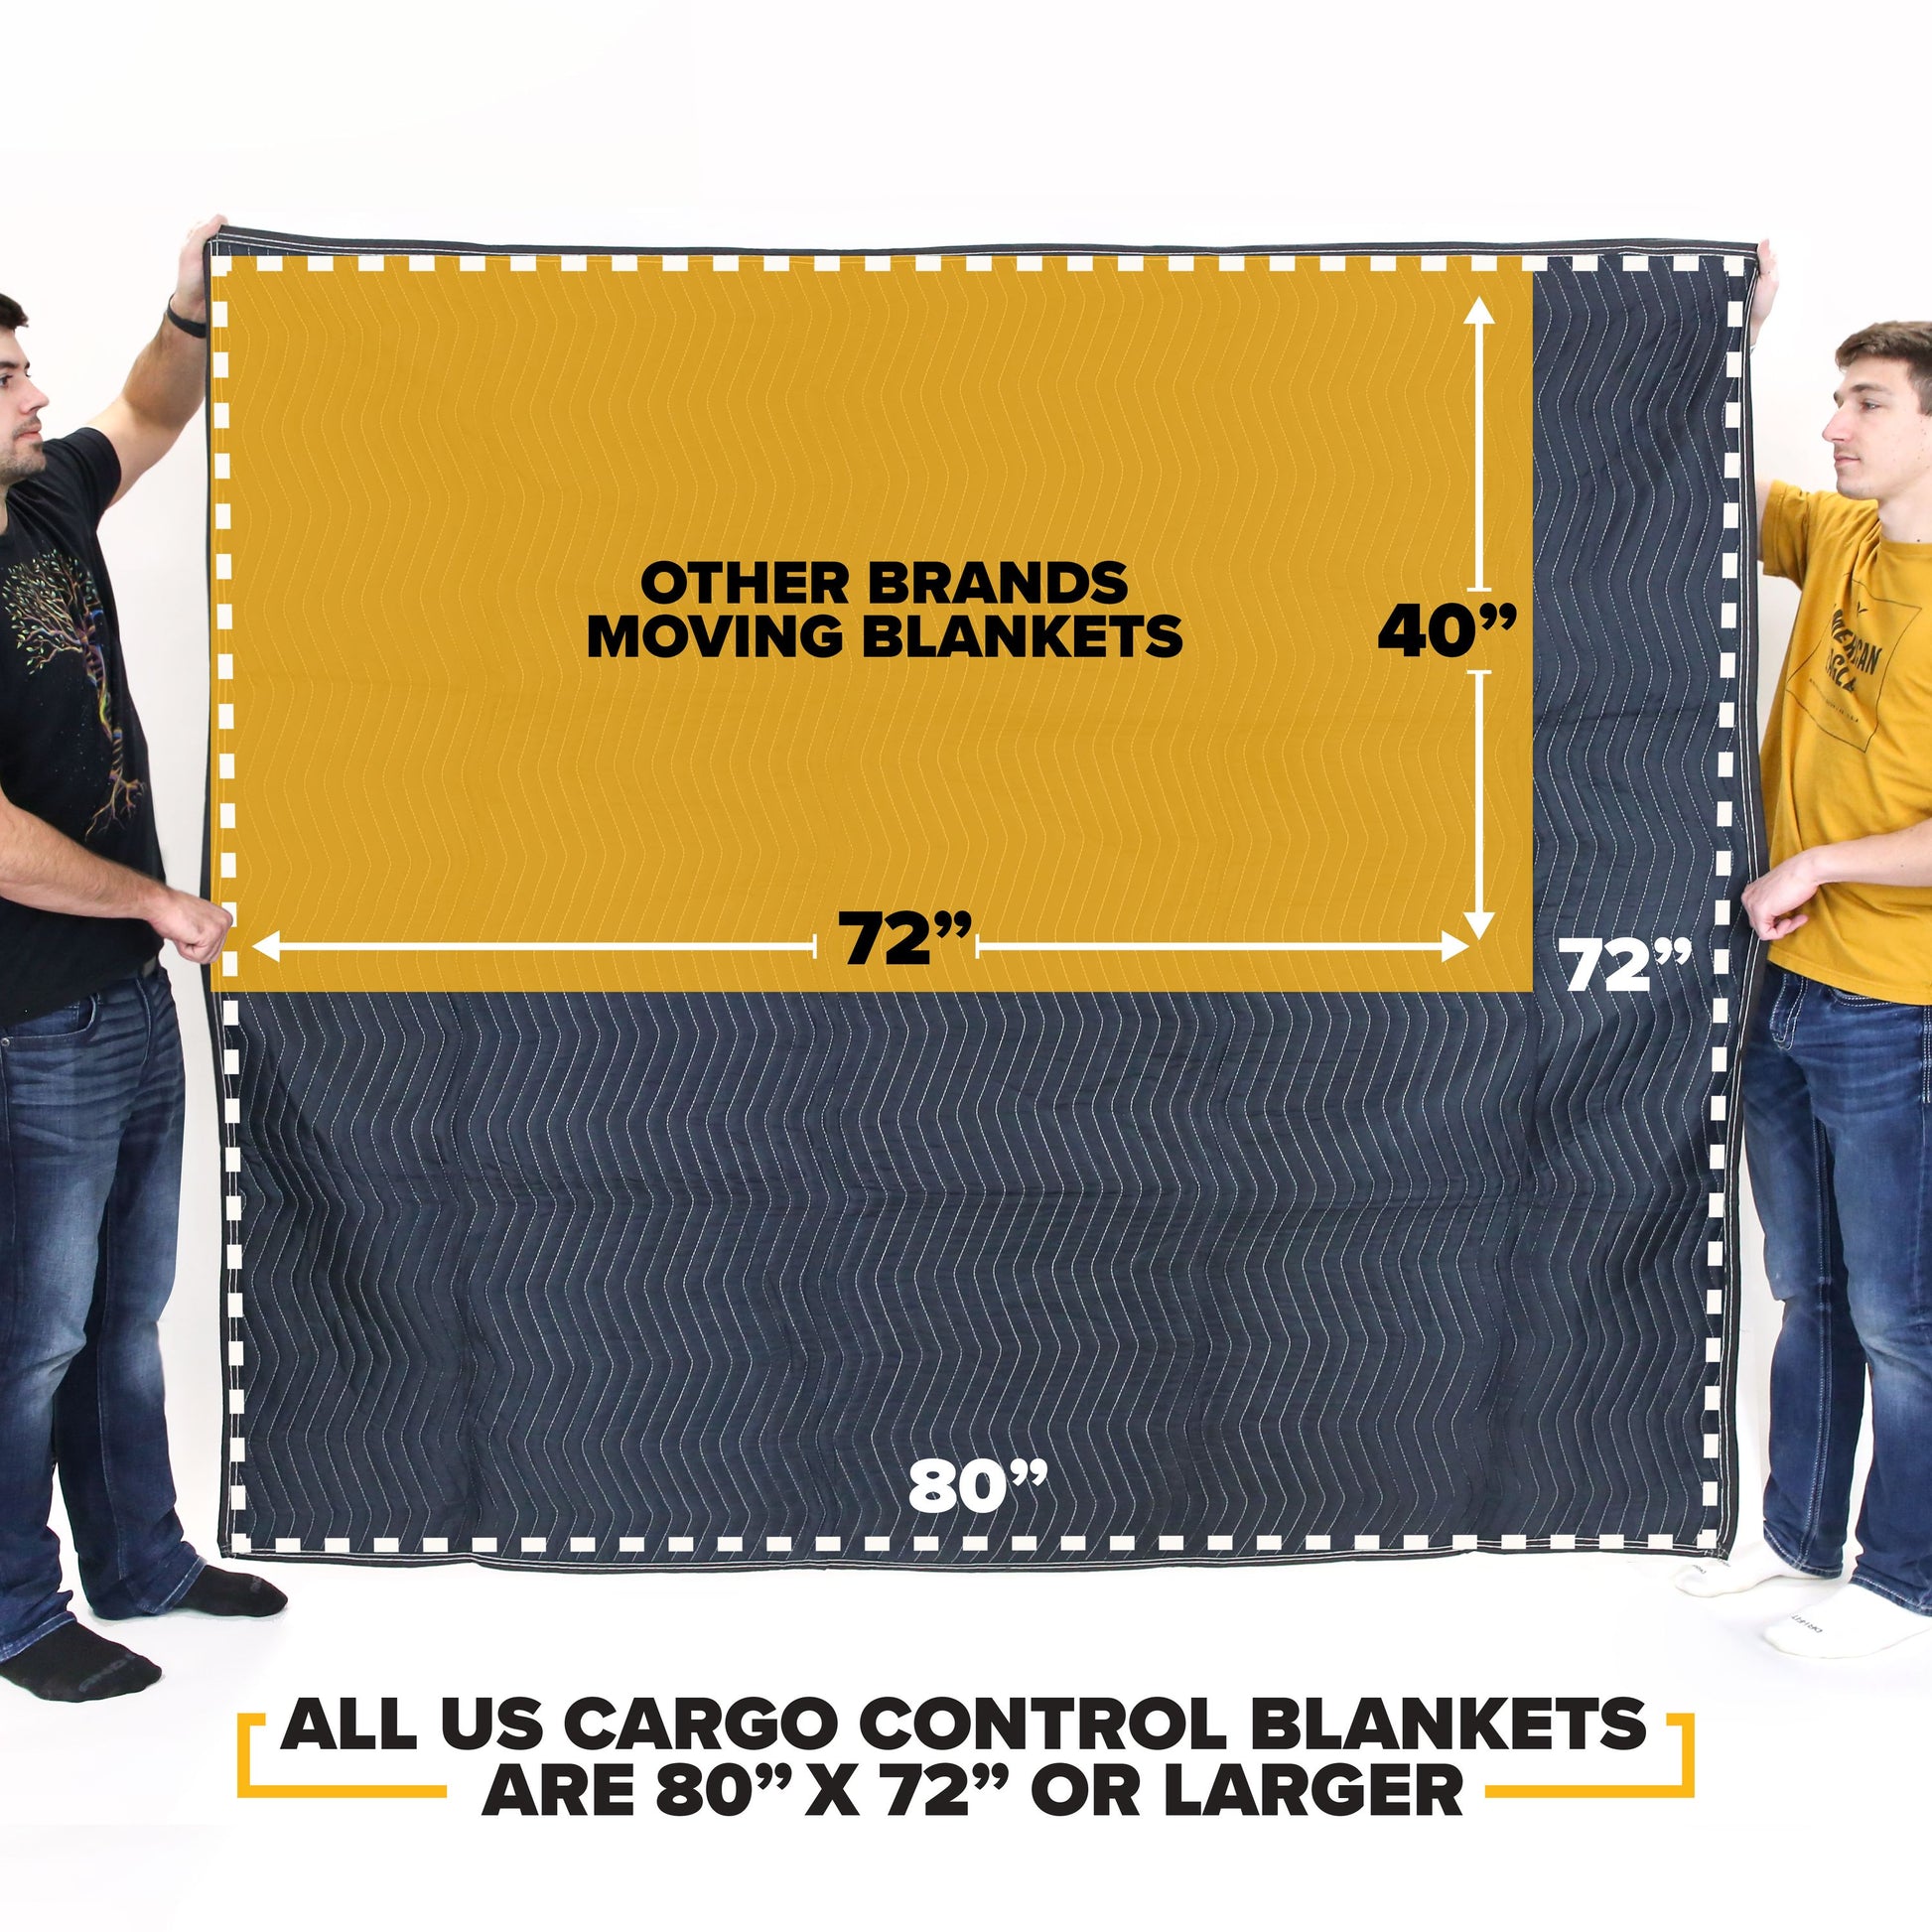 Moving Blanket- Pro Mover image 4 of 11